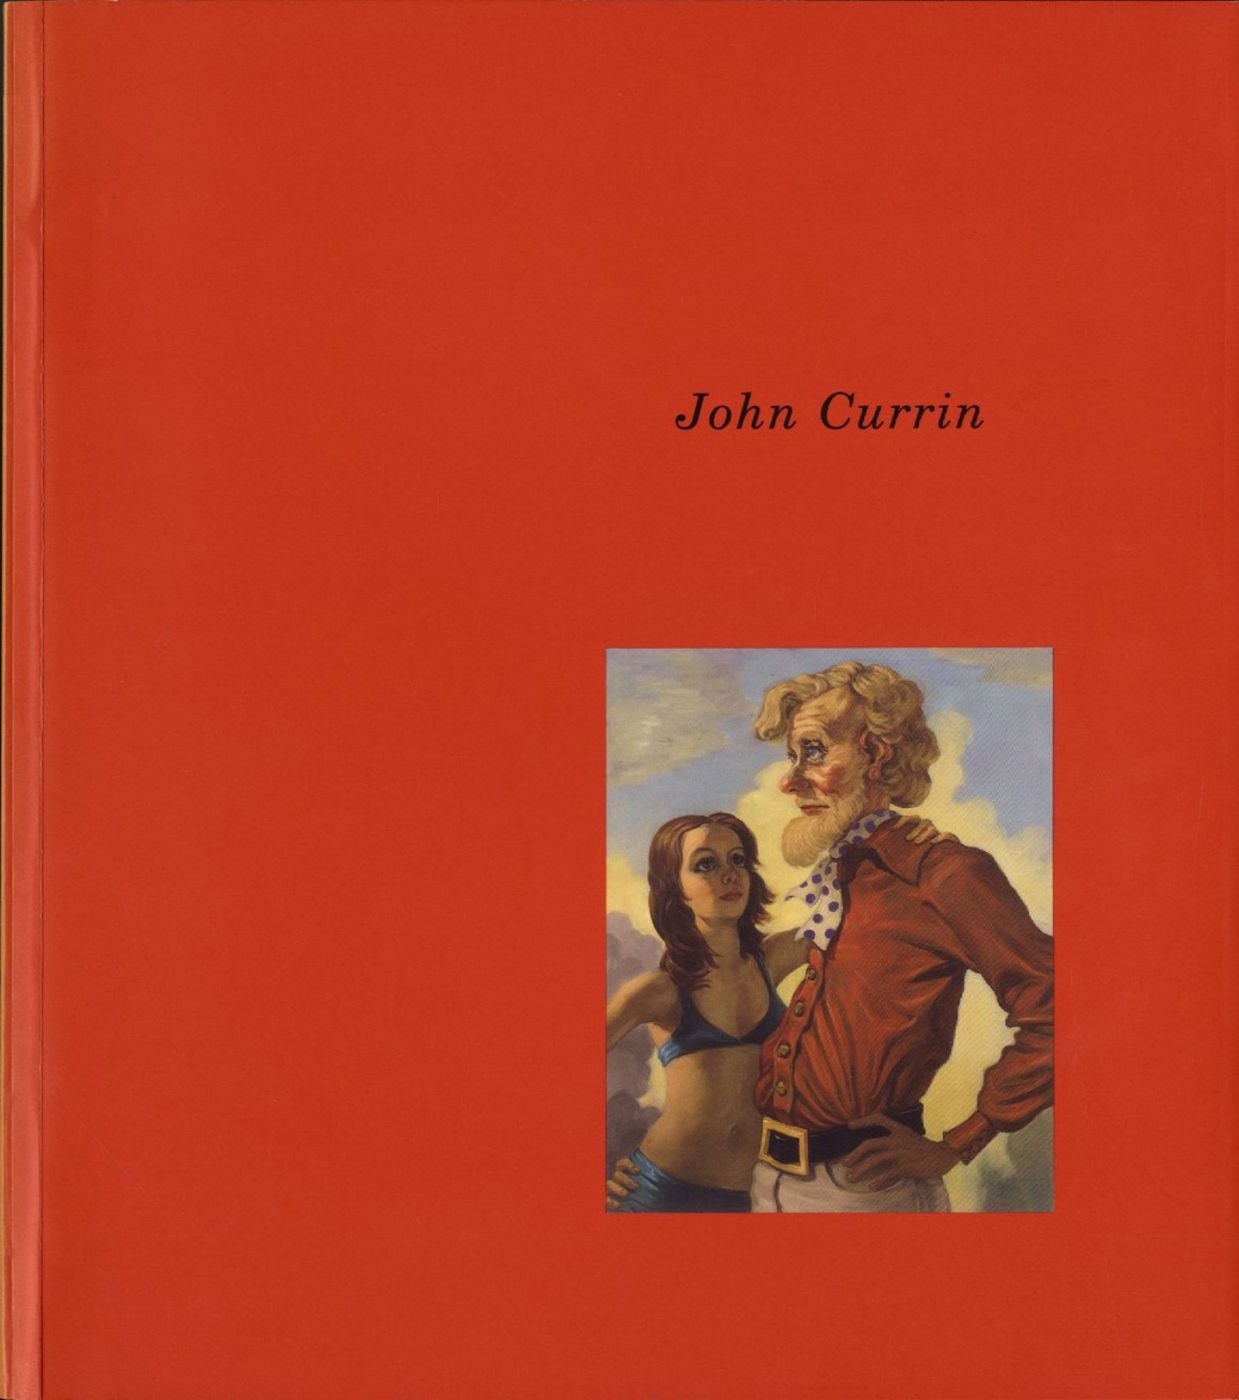 John Currin: Oeuvres / Works, 1989-1995